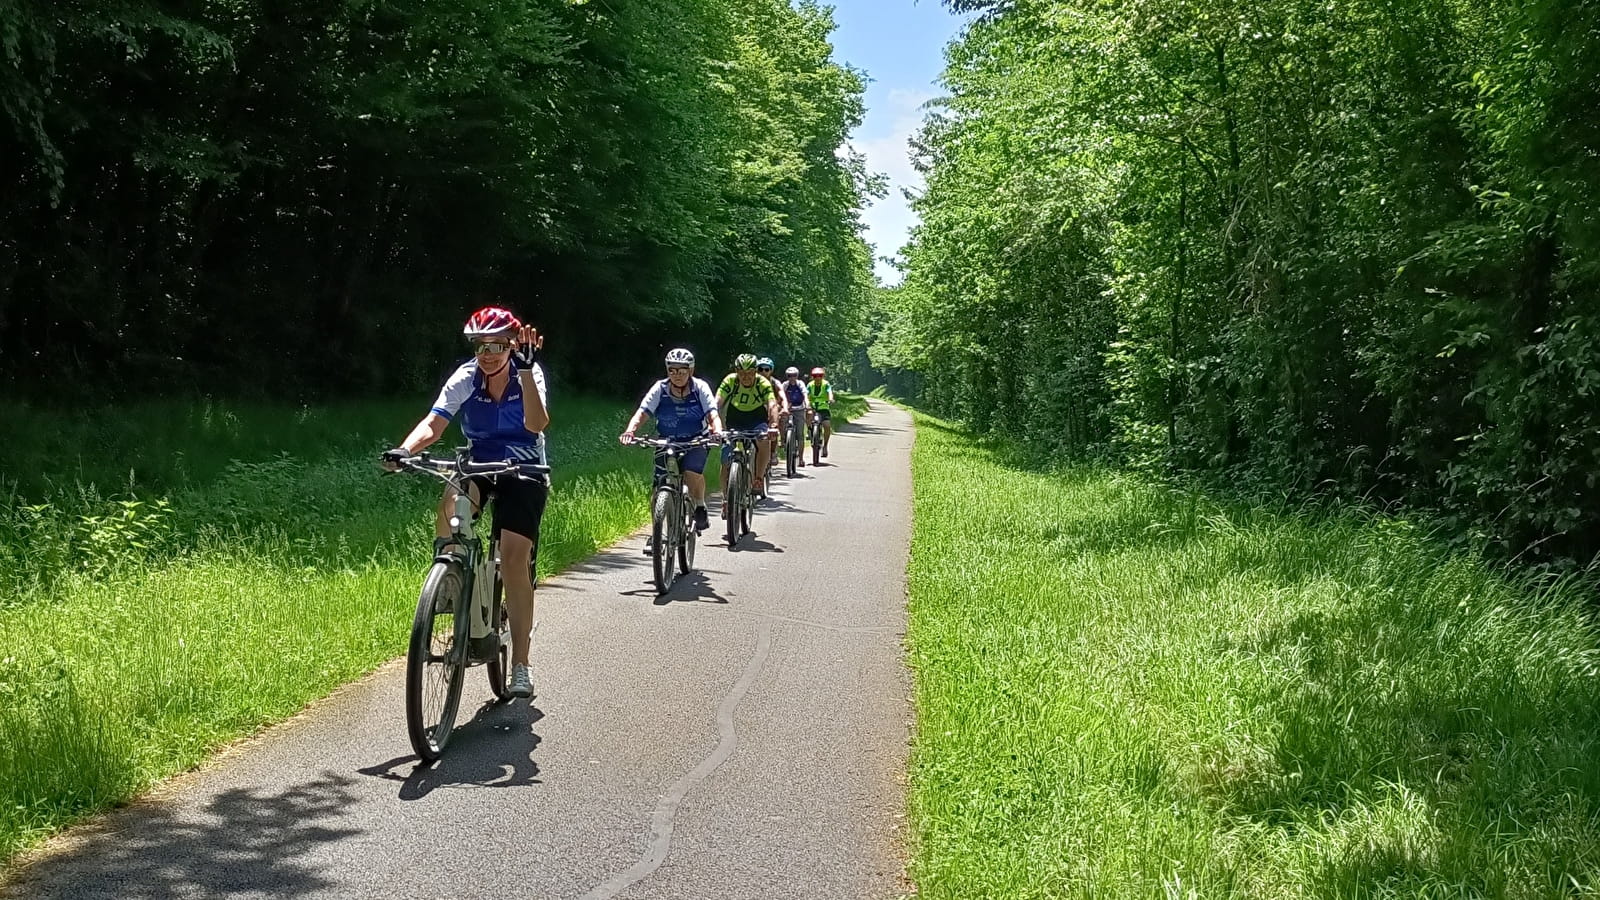 The small tour of South Burgundy by bike